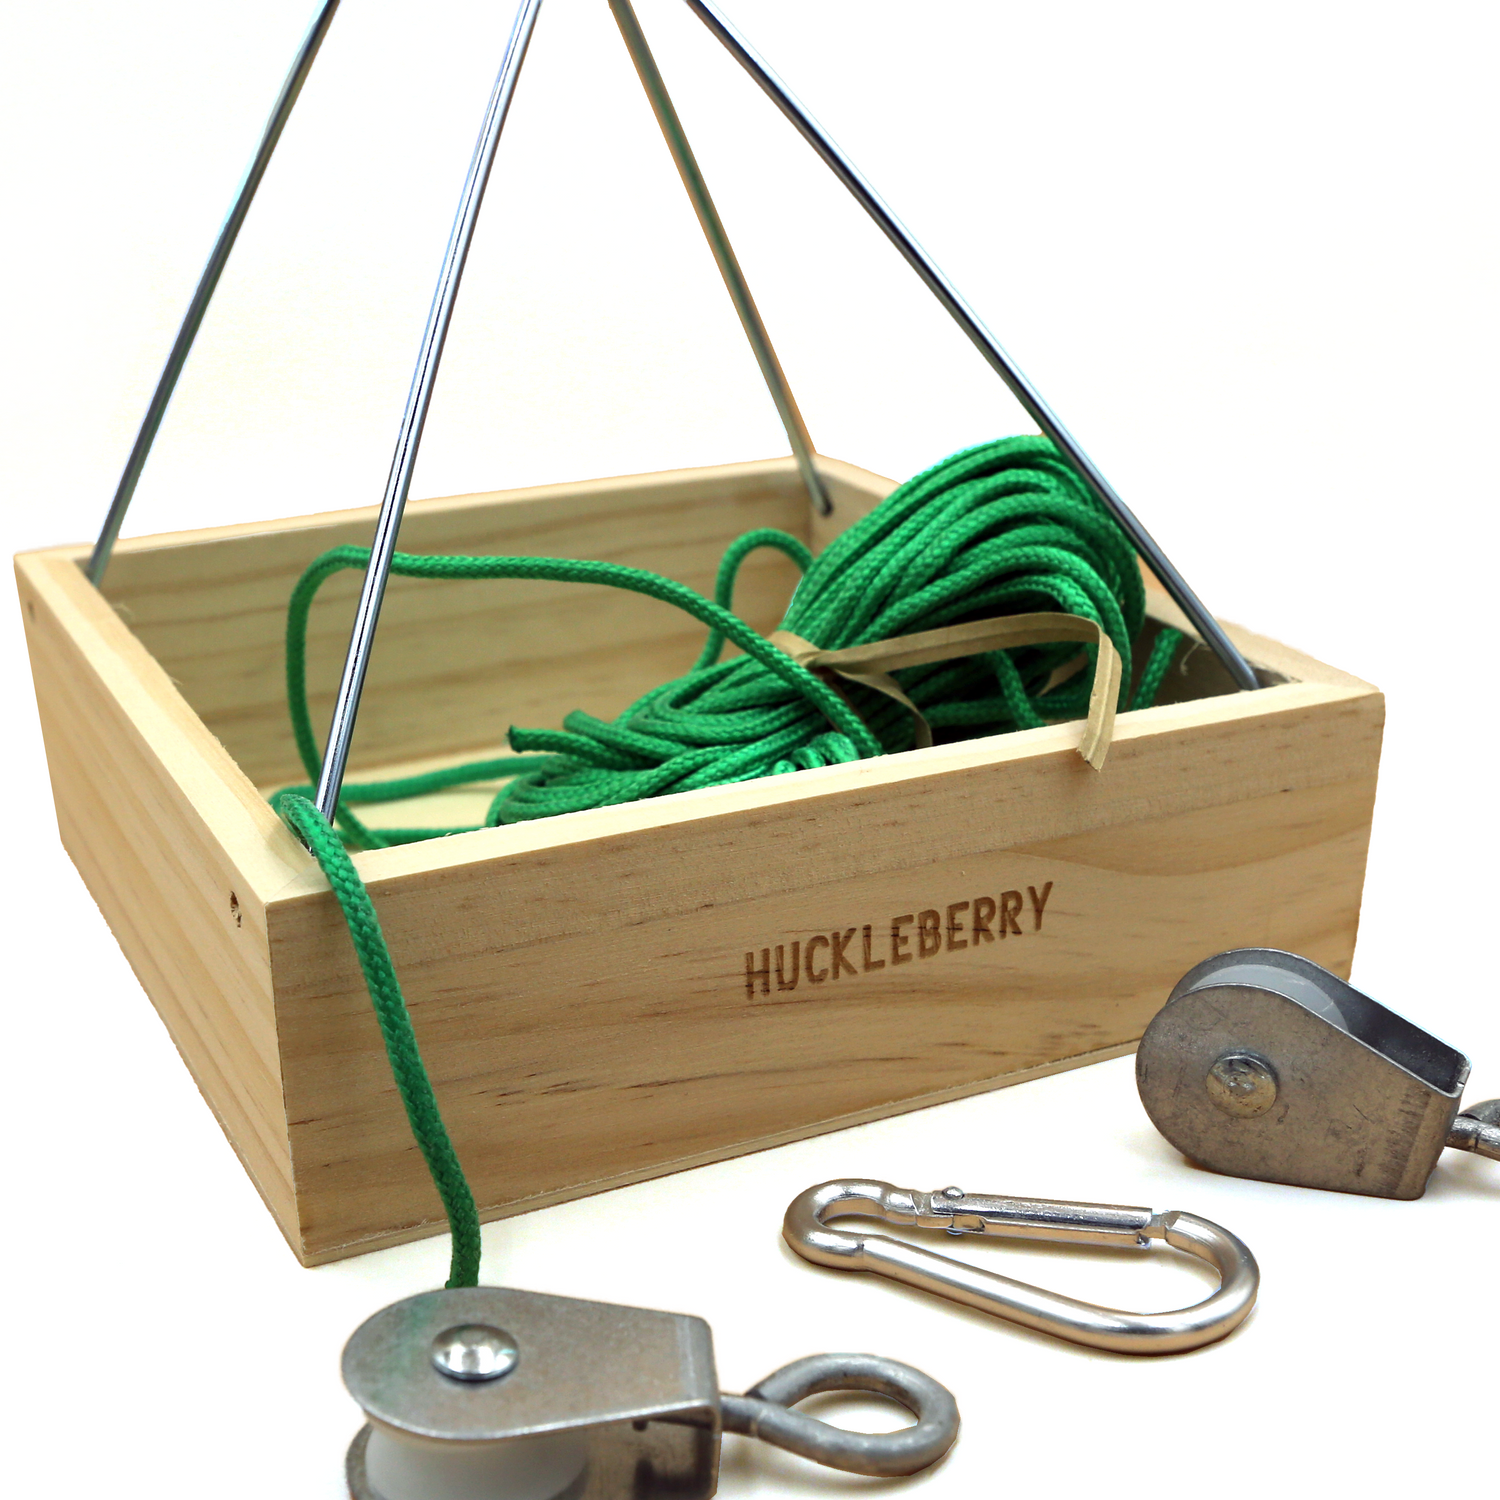 Huckleberry Wood Carving Tool